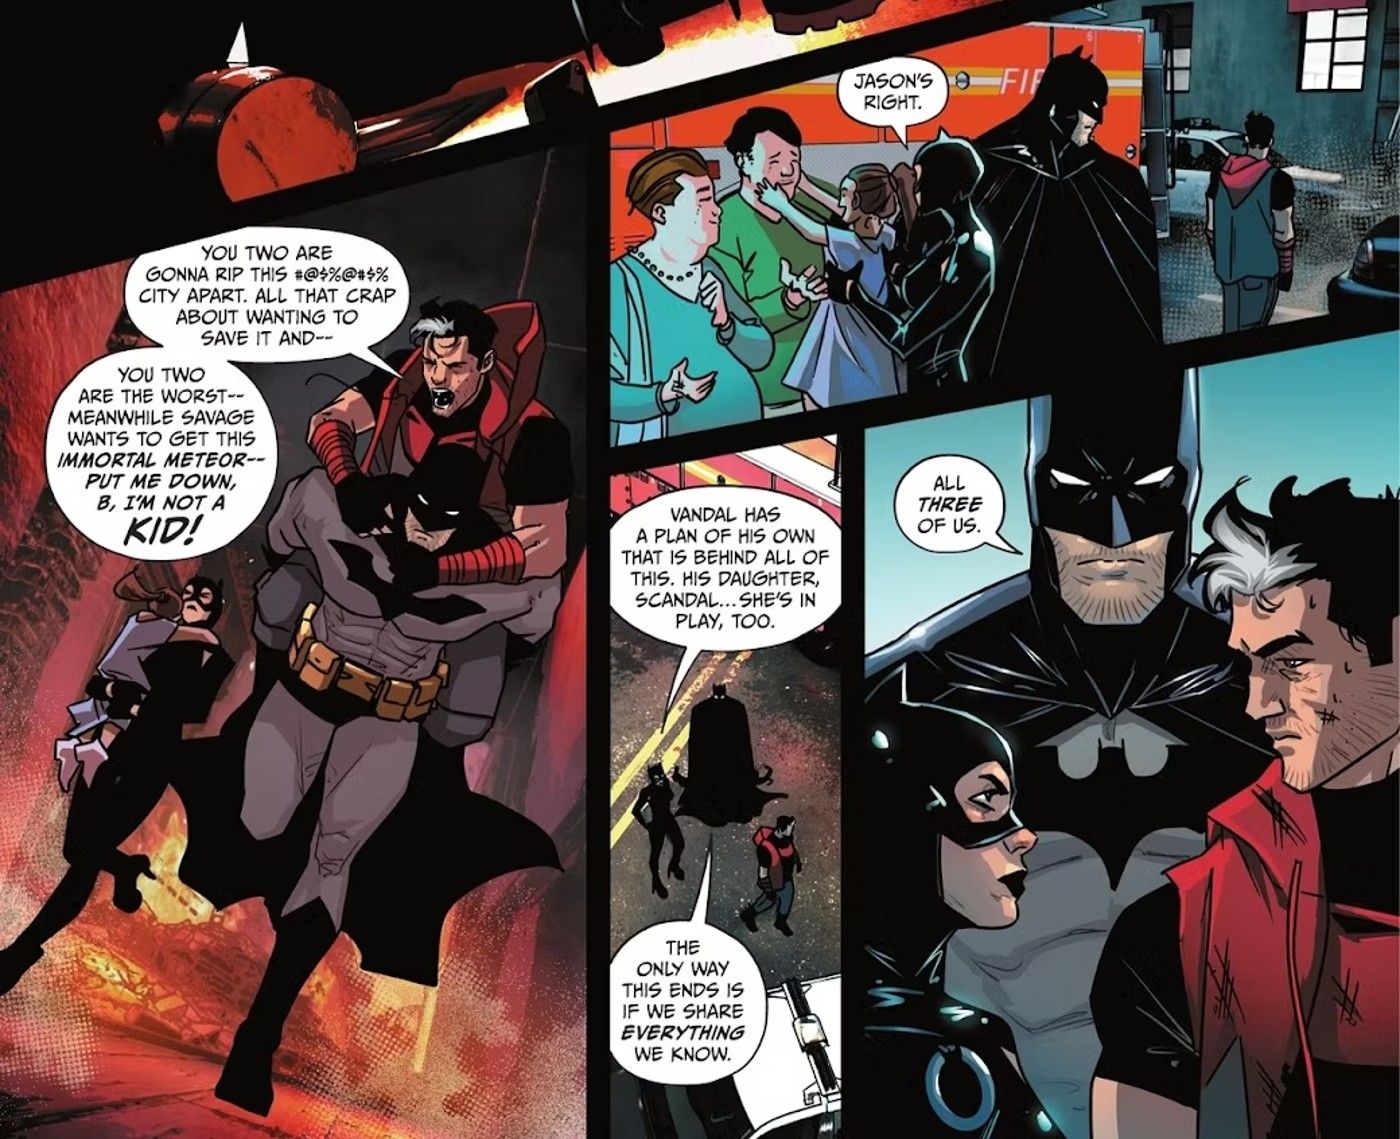 Red Hood Tells Batman and Catwoman Gotham Needs Them All to Unite